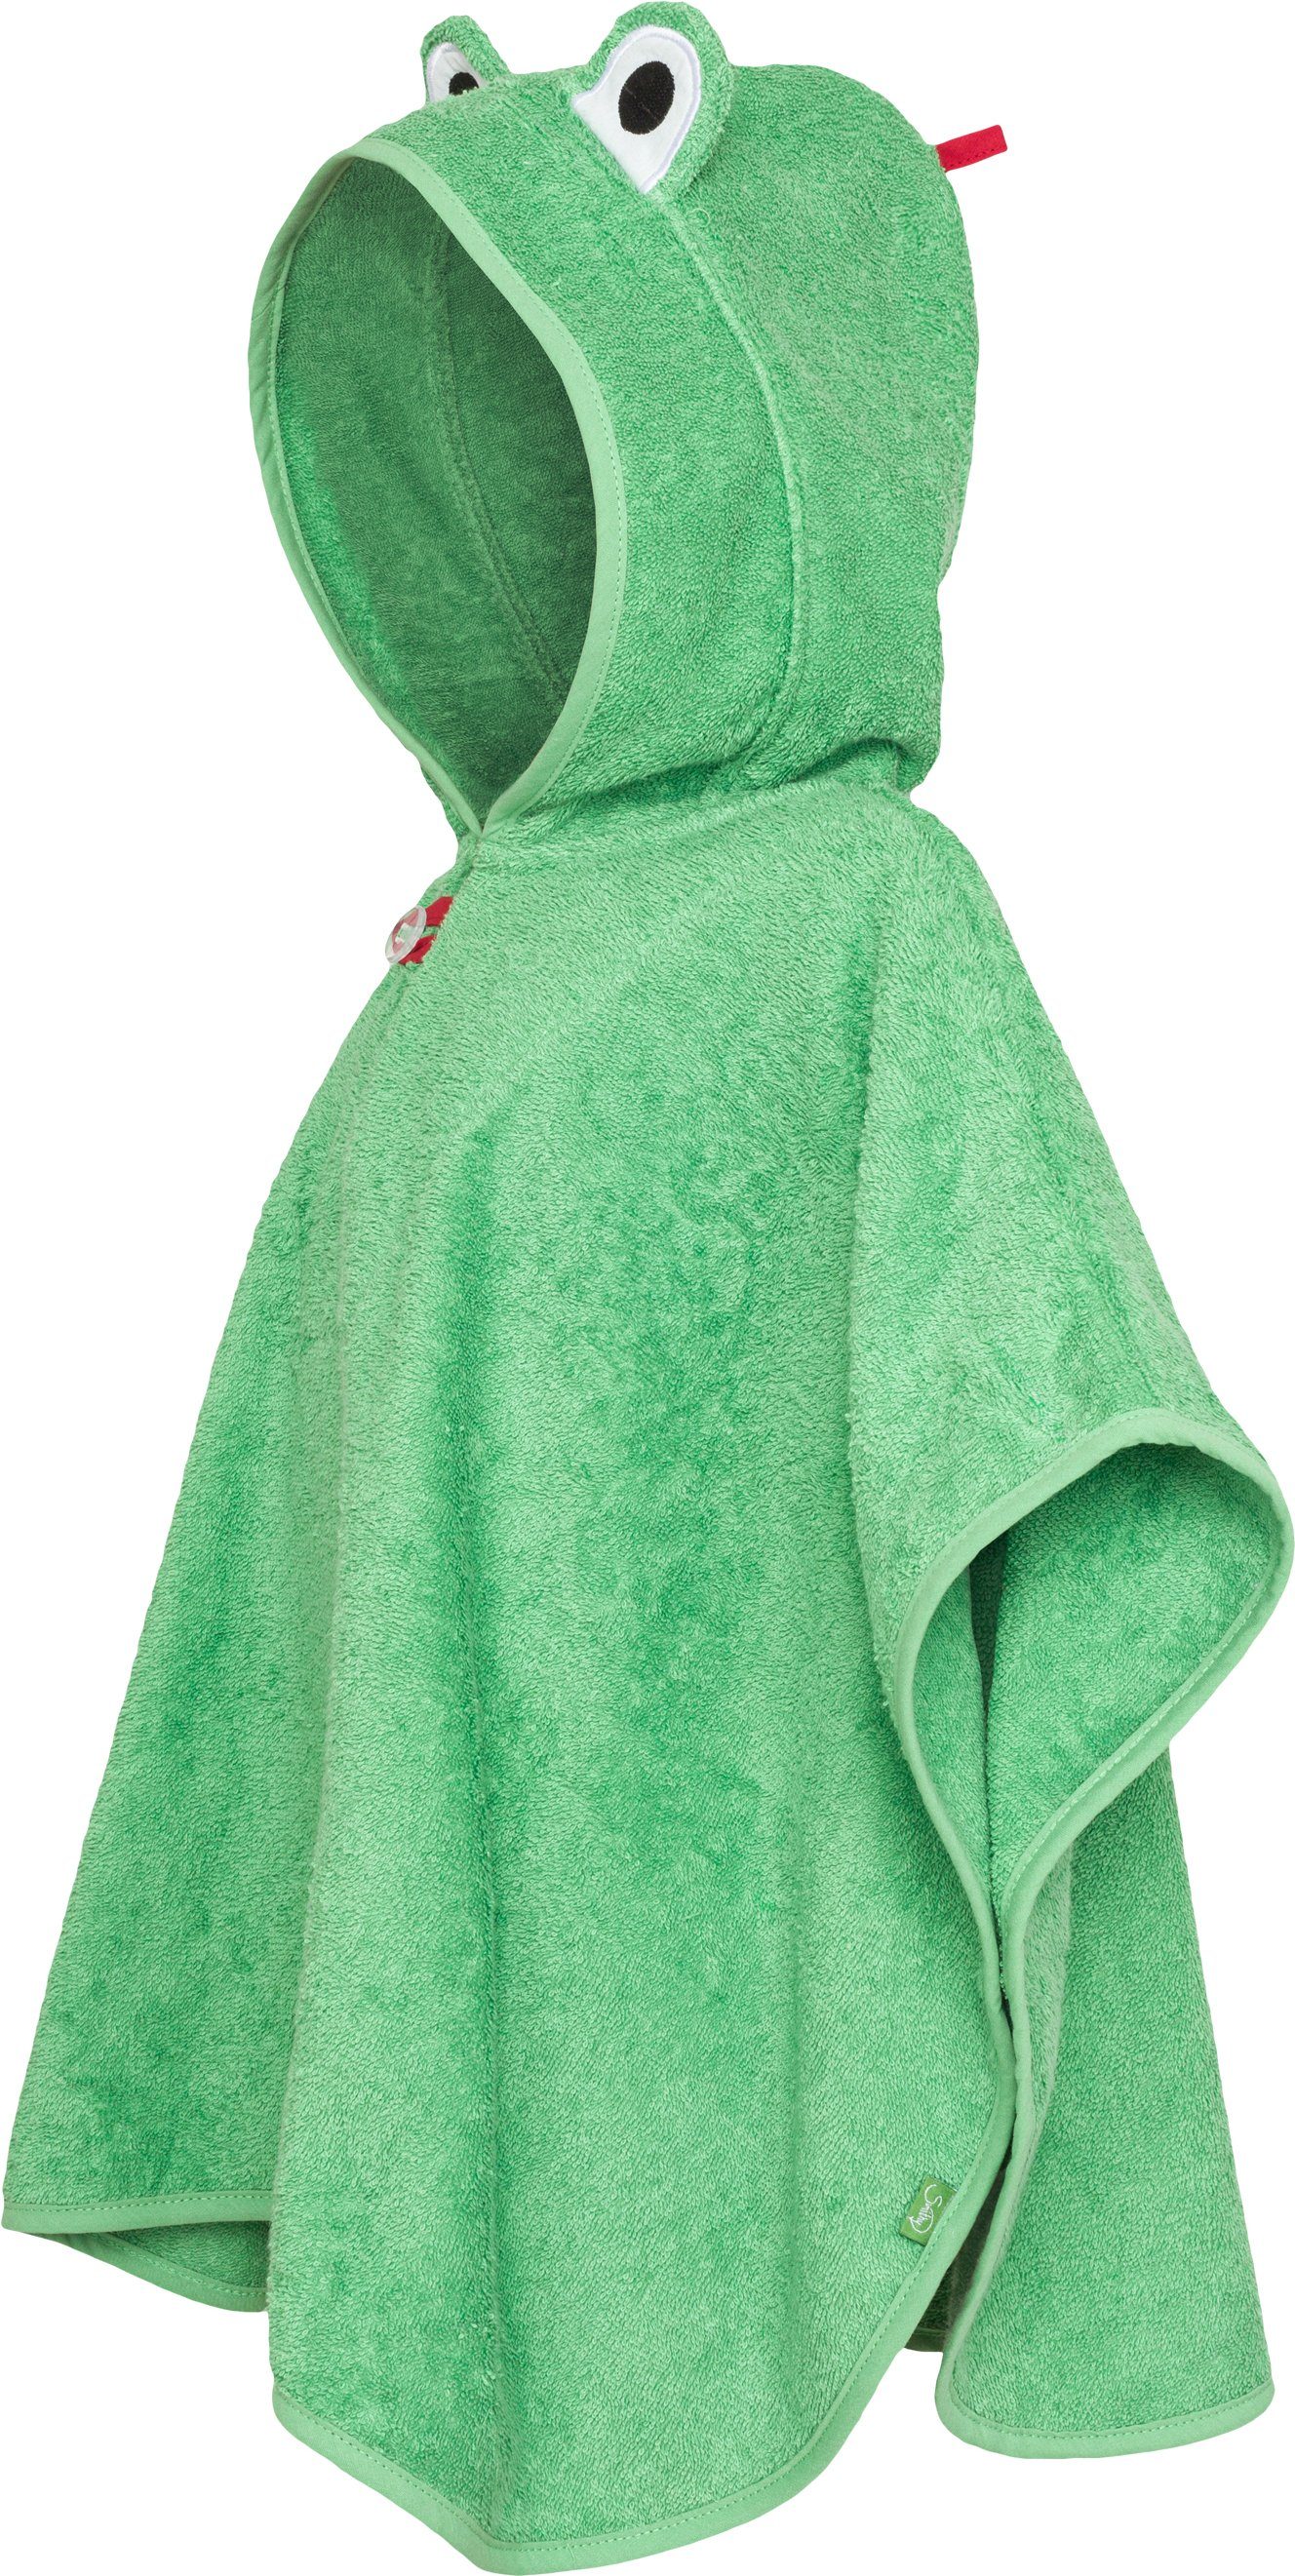 Frosch, made Smithy am Knöpfe Europe in Baby Frottee, grün, Frottee, Badeponcho Armloch,